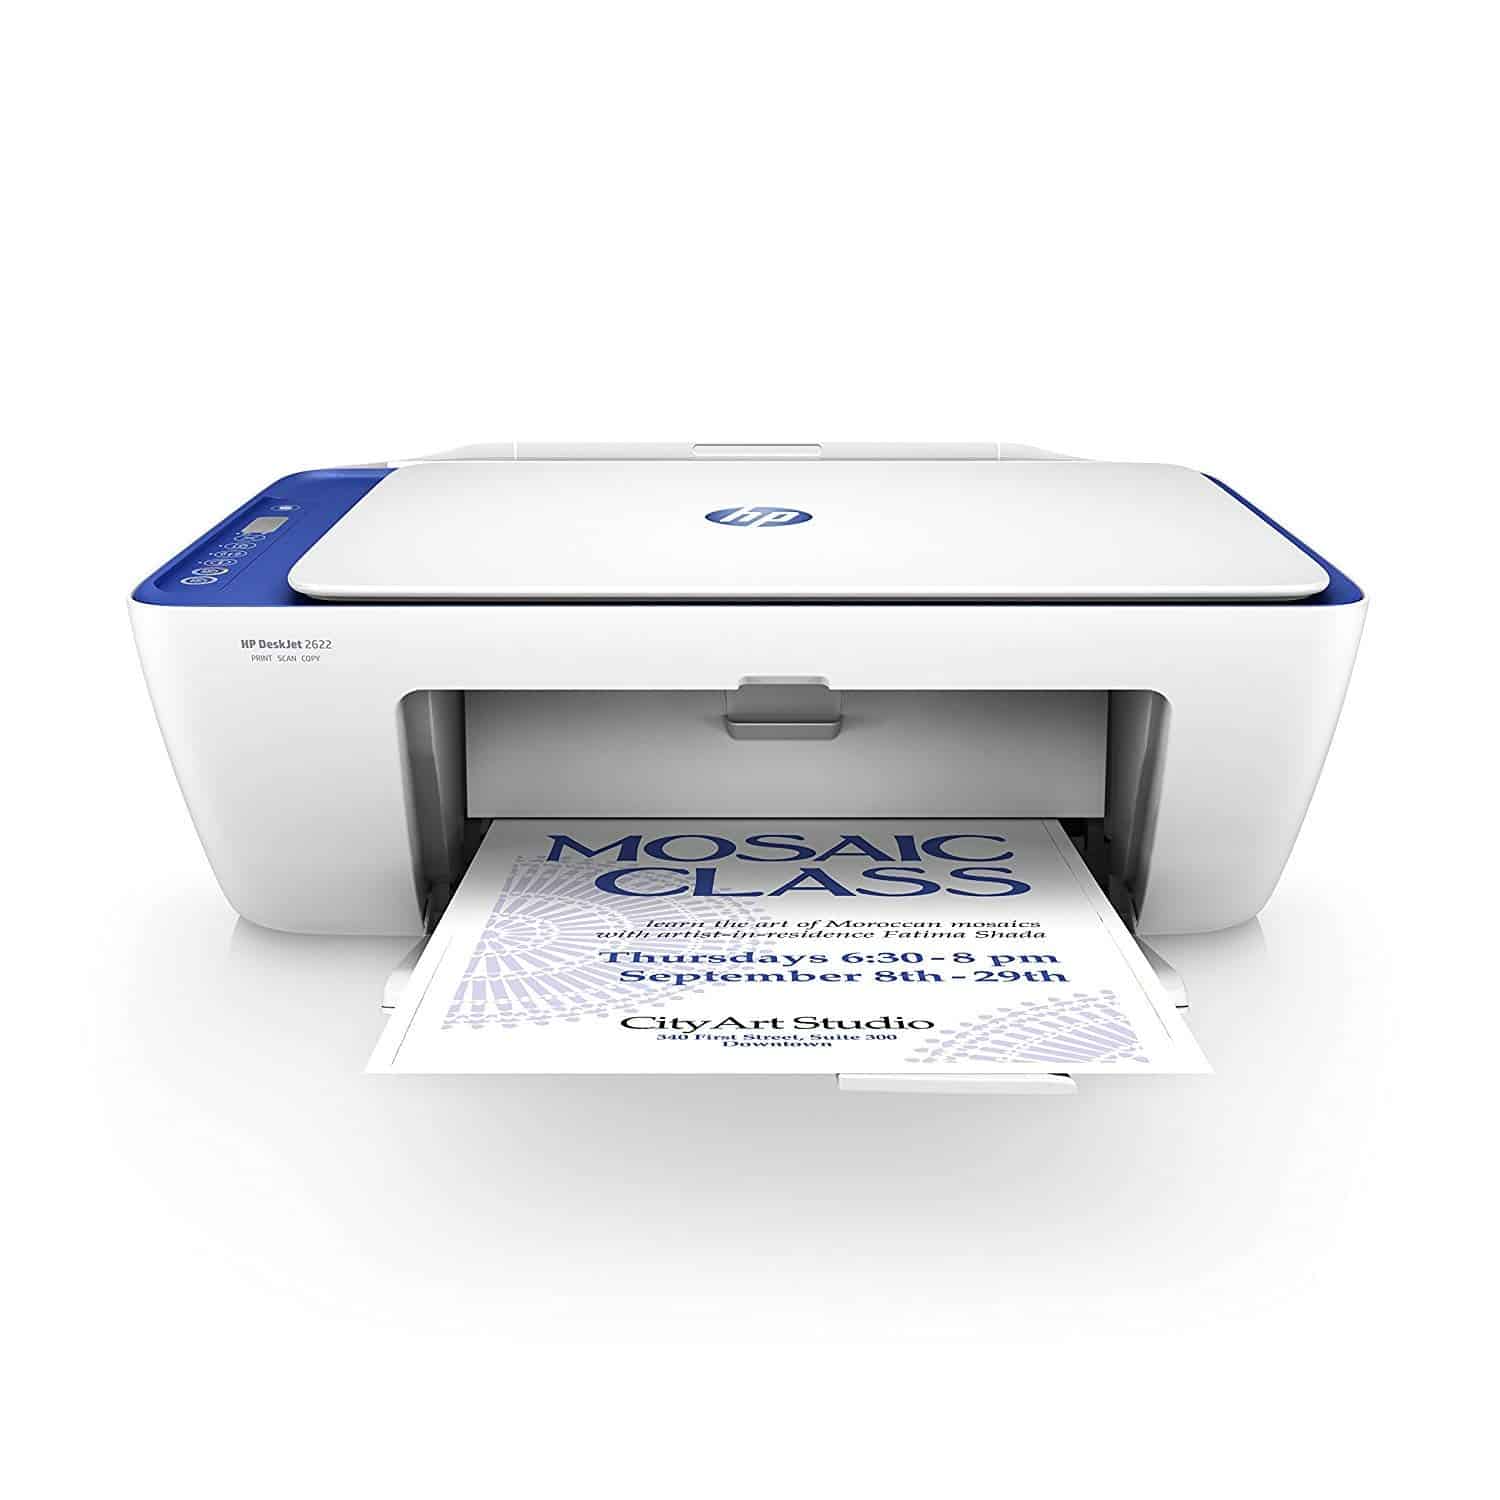 DEAL ALERT: An HP multi-function printer for less than $20 and FREE Ink!